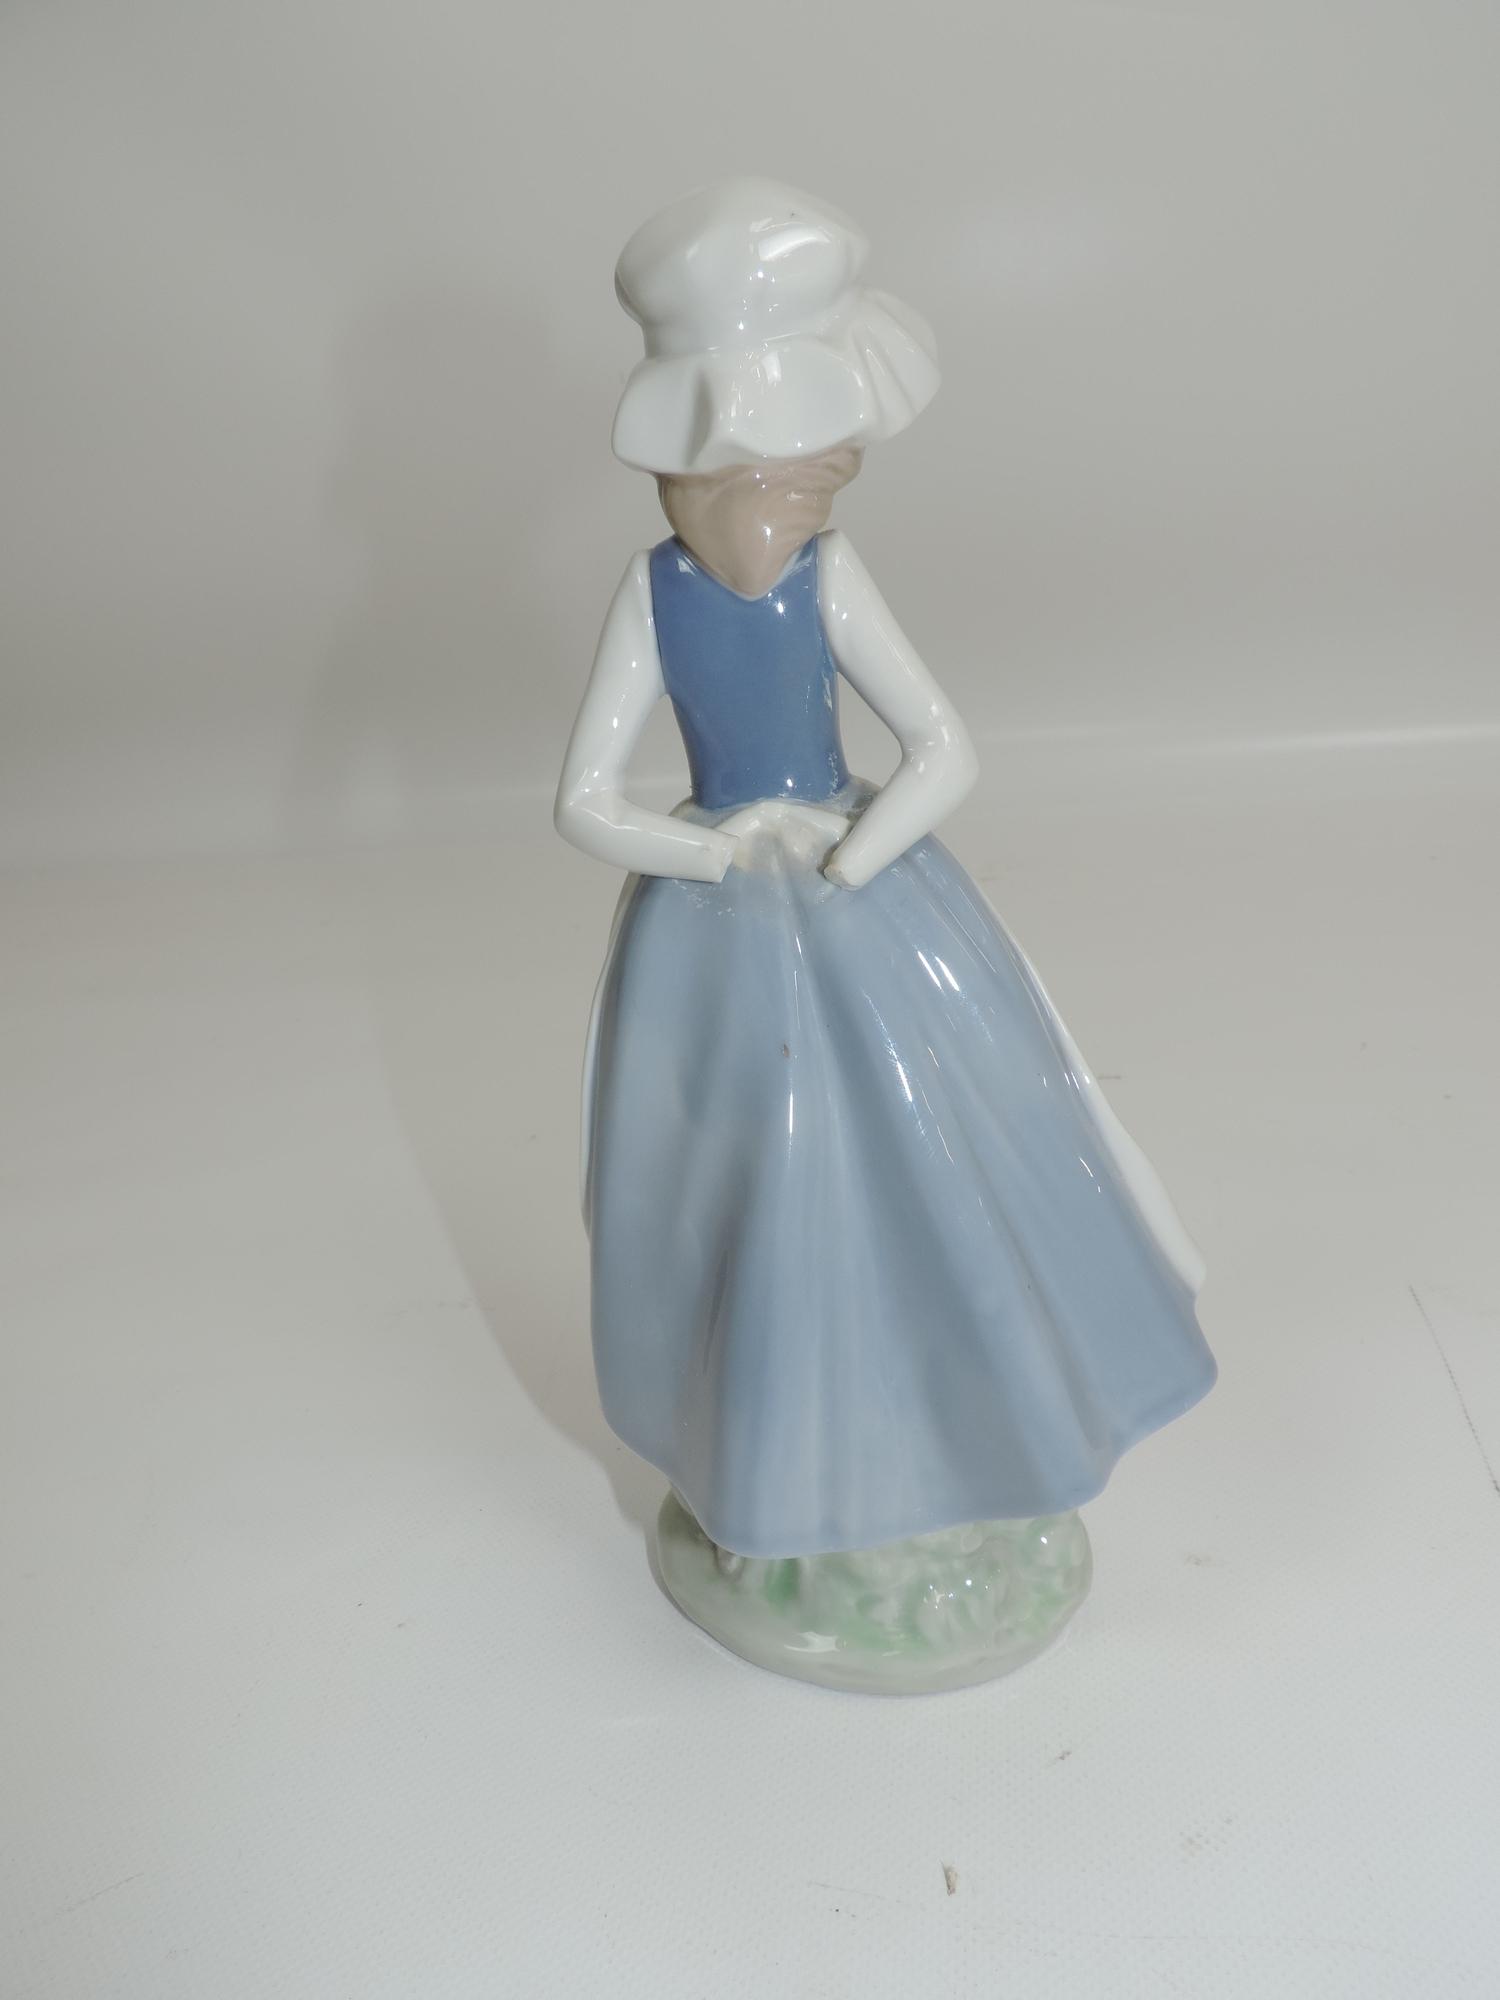 2x Spanish Porcelain Figures - One Miguel and Other Is Lladro (Hands Missing on Lladro) - Image 6 of 8